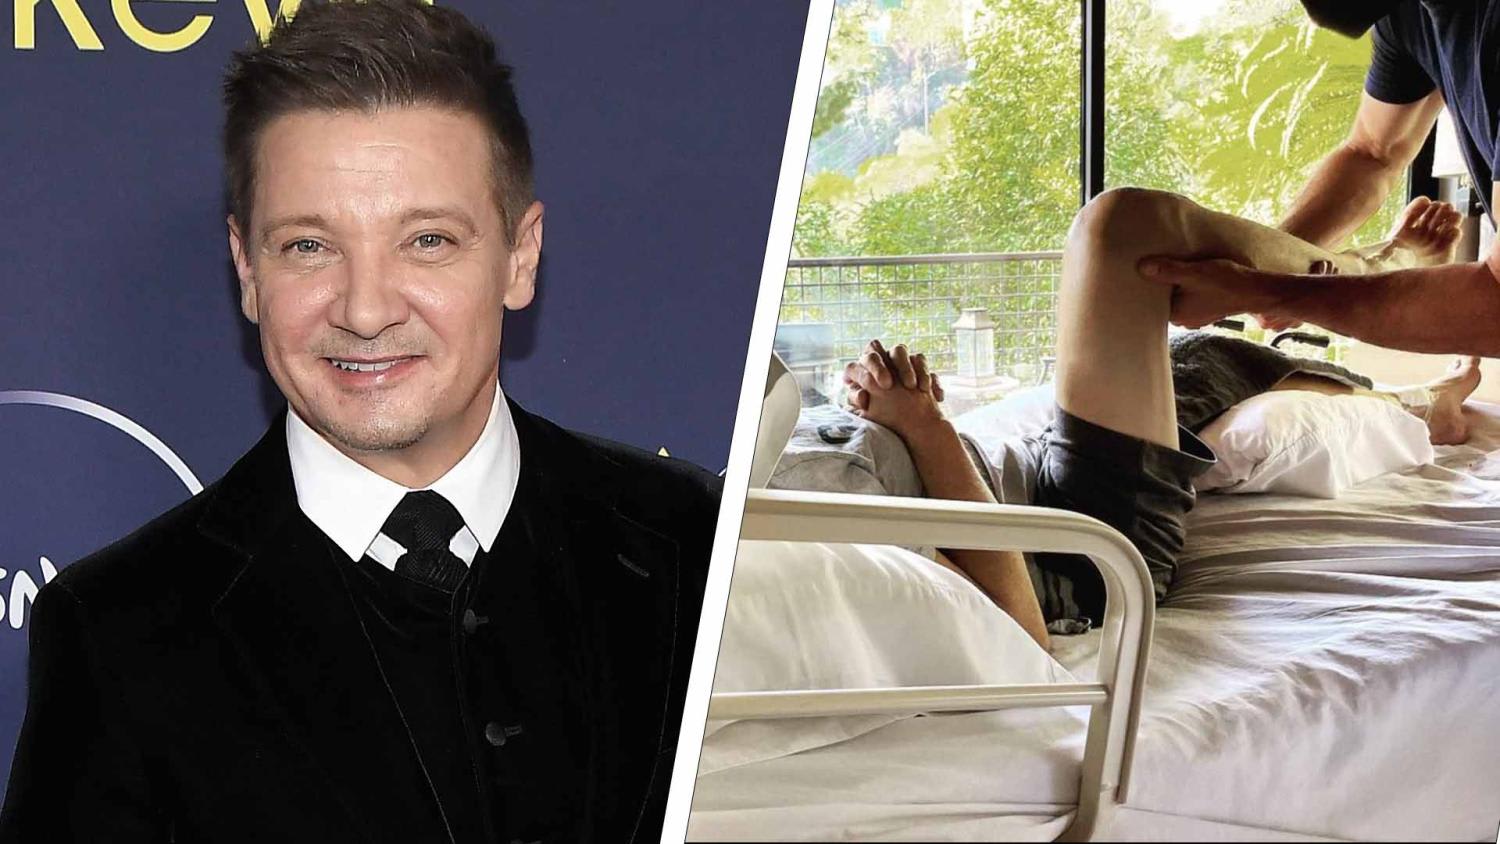 Jeremy Renner Broke More Than 30 Bones In Snowplow Accident, Shares Pic Of His Physical Therapy Treatment: "These Bones Will Grow Stronger"